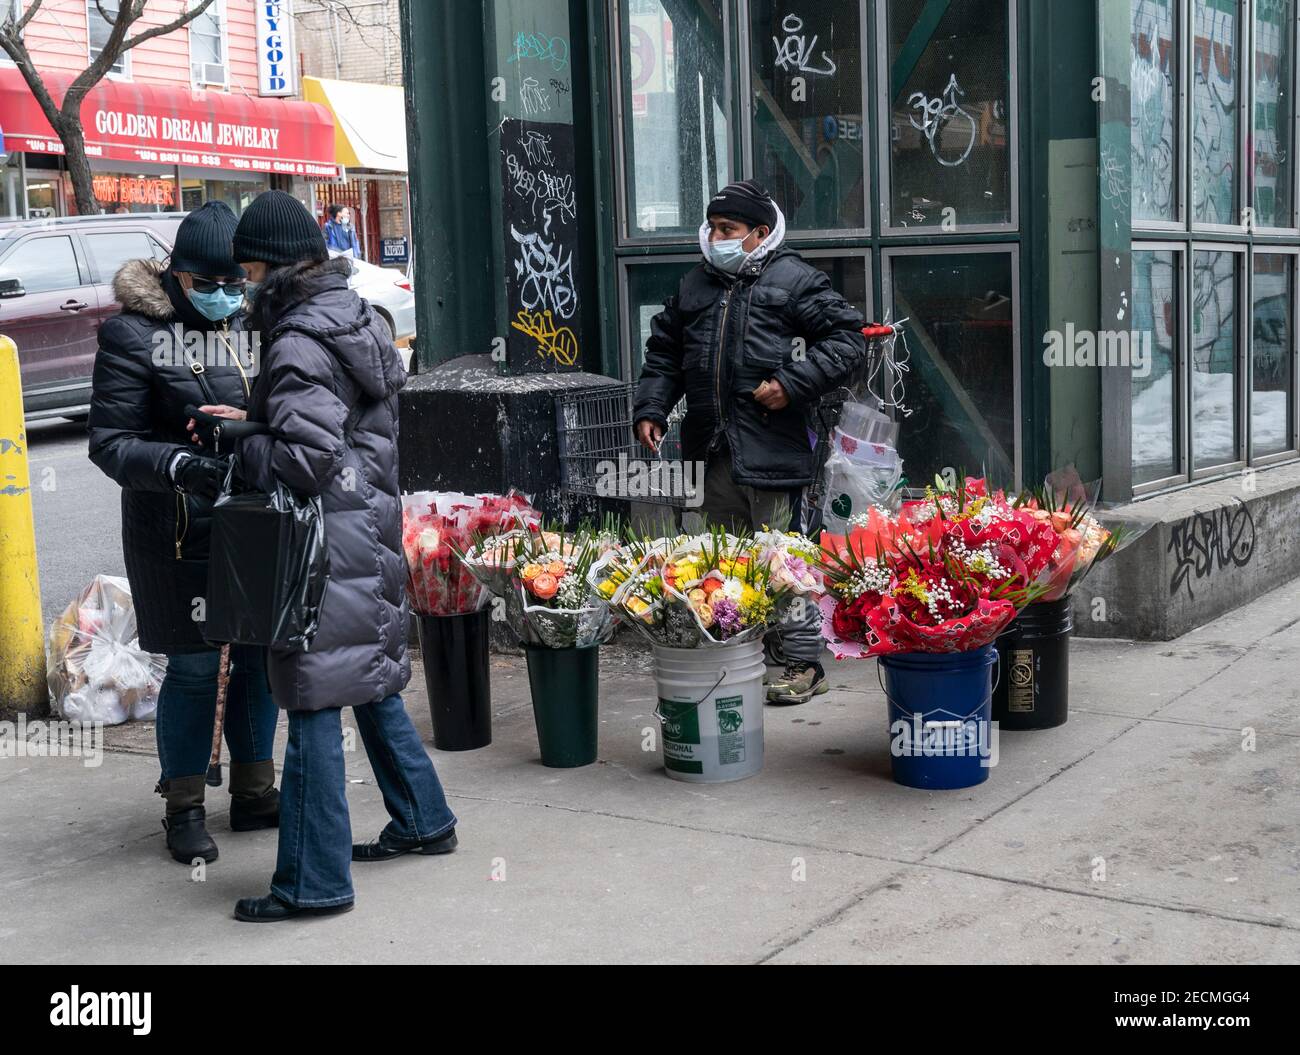 New York, NY - February 13, 2021: Vendor selling flowers for Valentines Day on the street in Kingsbridge section of the Bronx Stock Photo